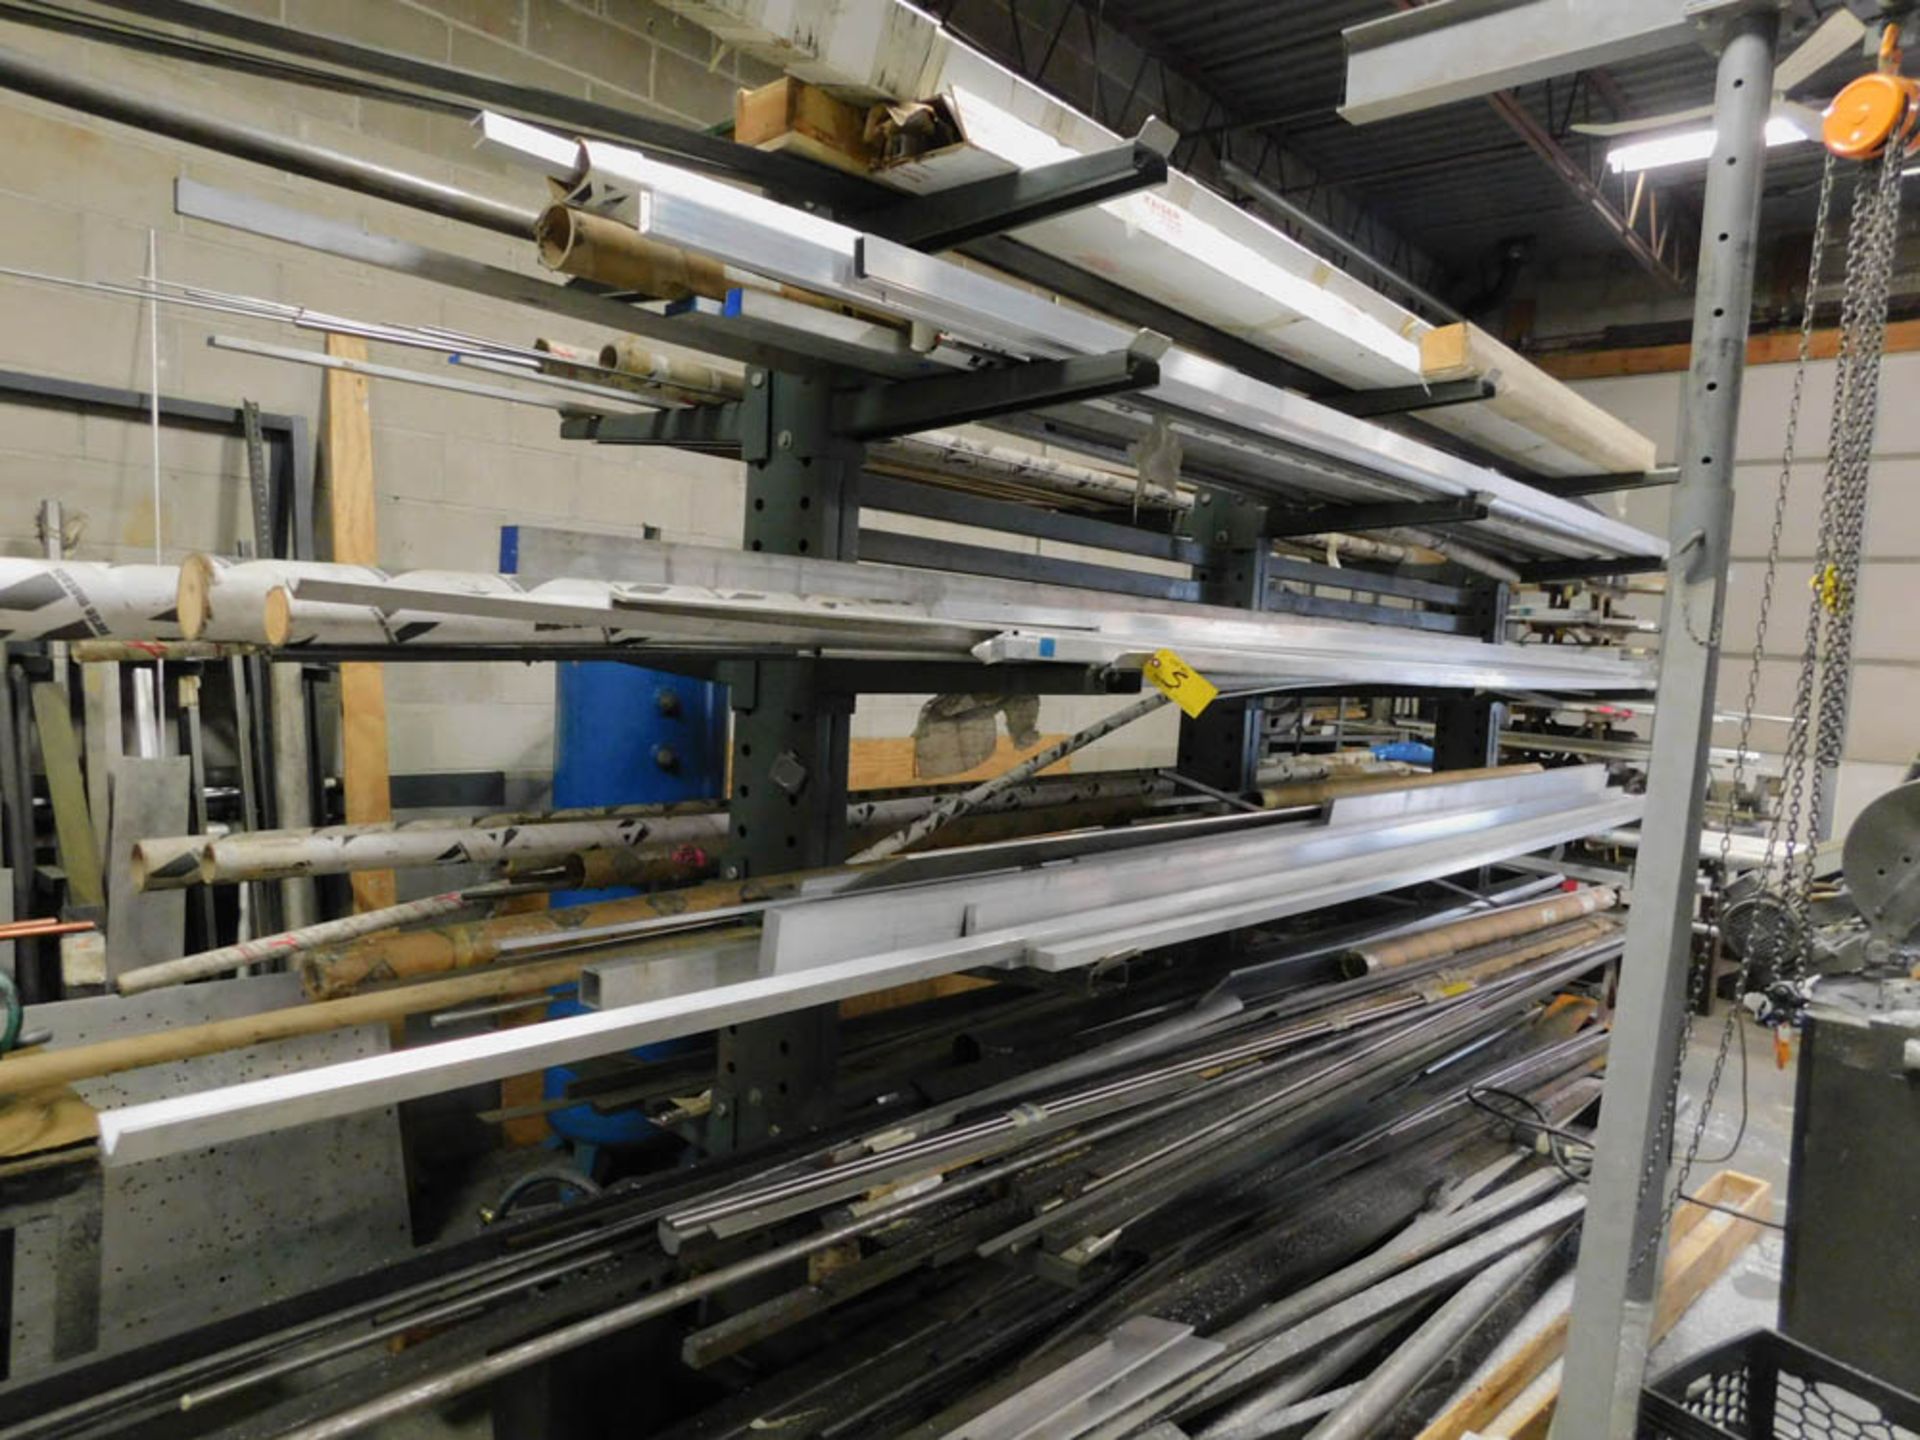 (2) SECTIONS OF CANTILEVER RACK 96" HIGH WITH 24" FINGERS (NO CONTENTS)